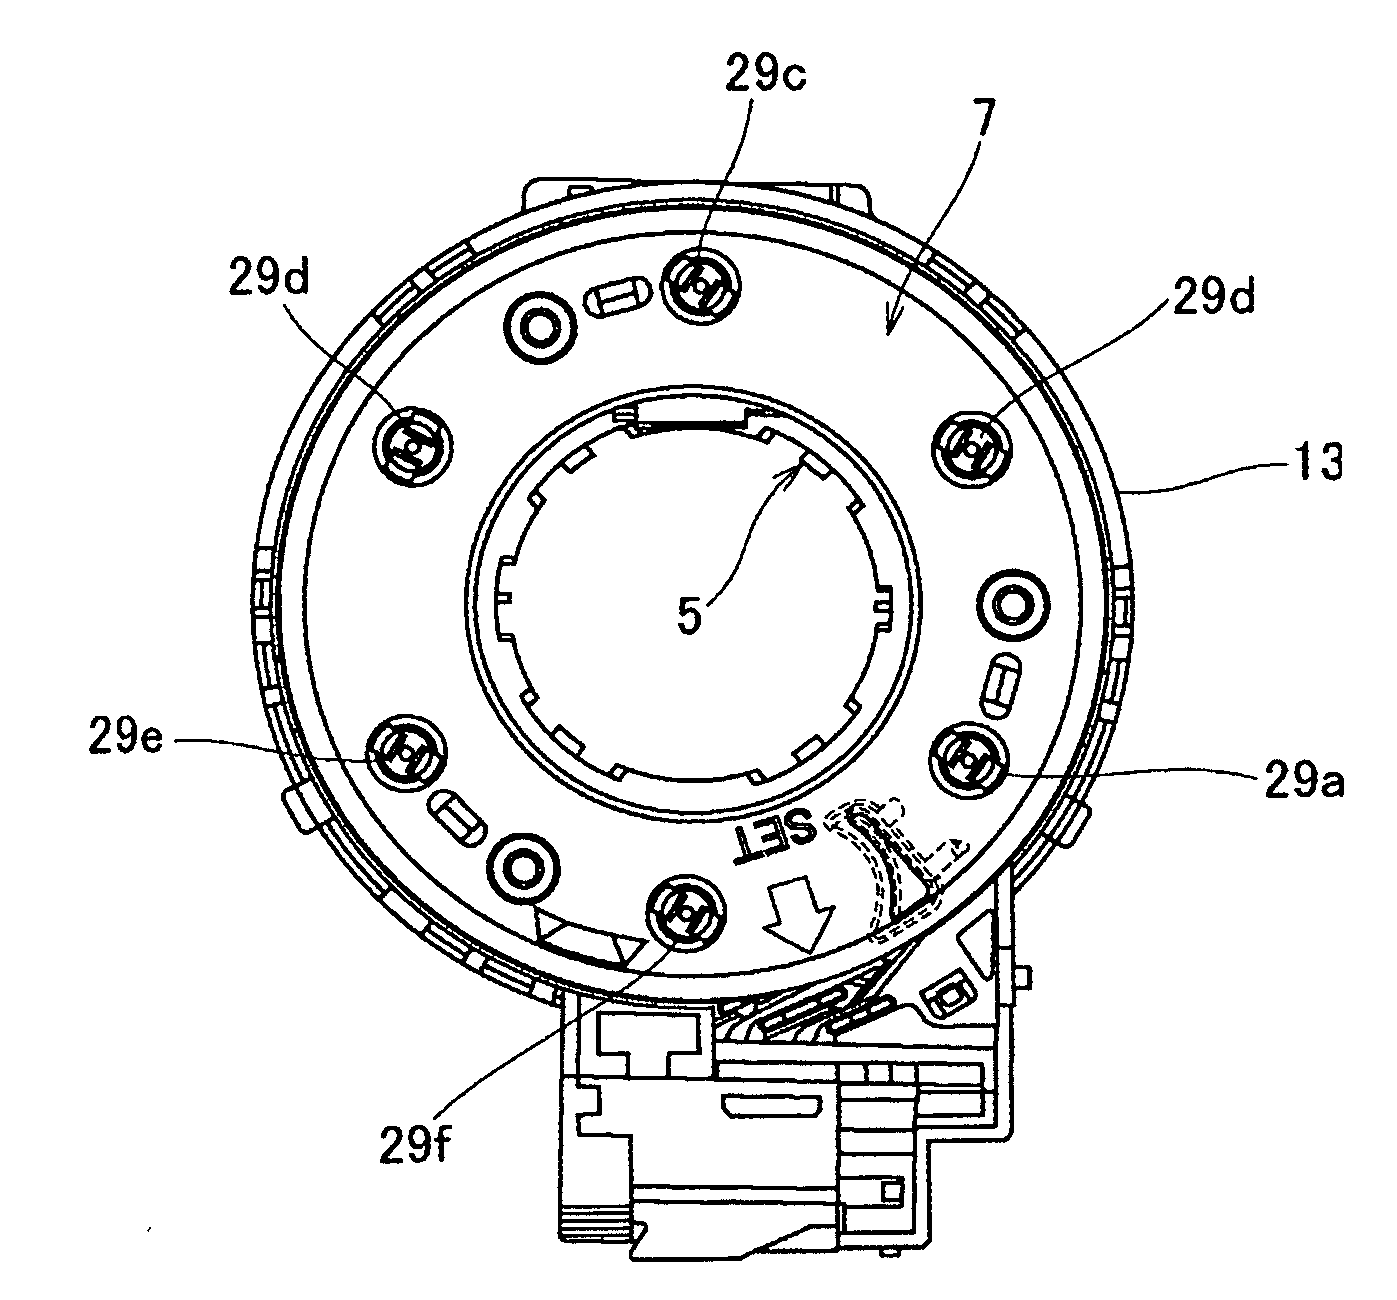 Rotary Connector Device